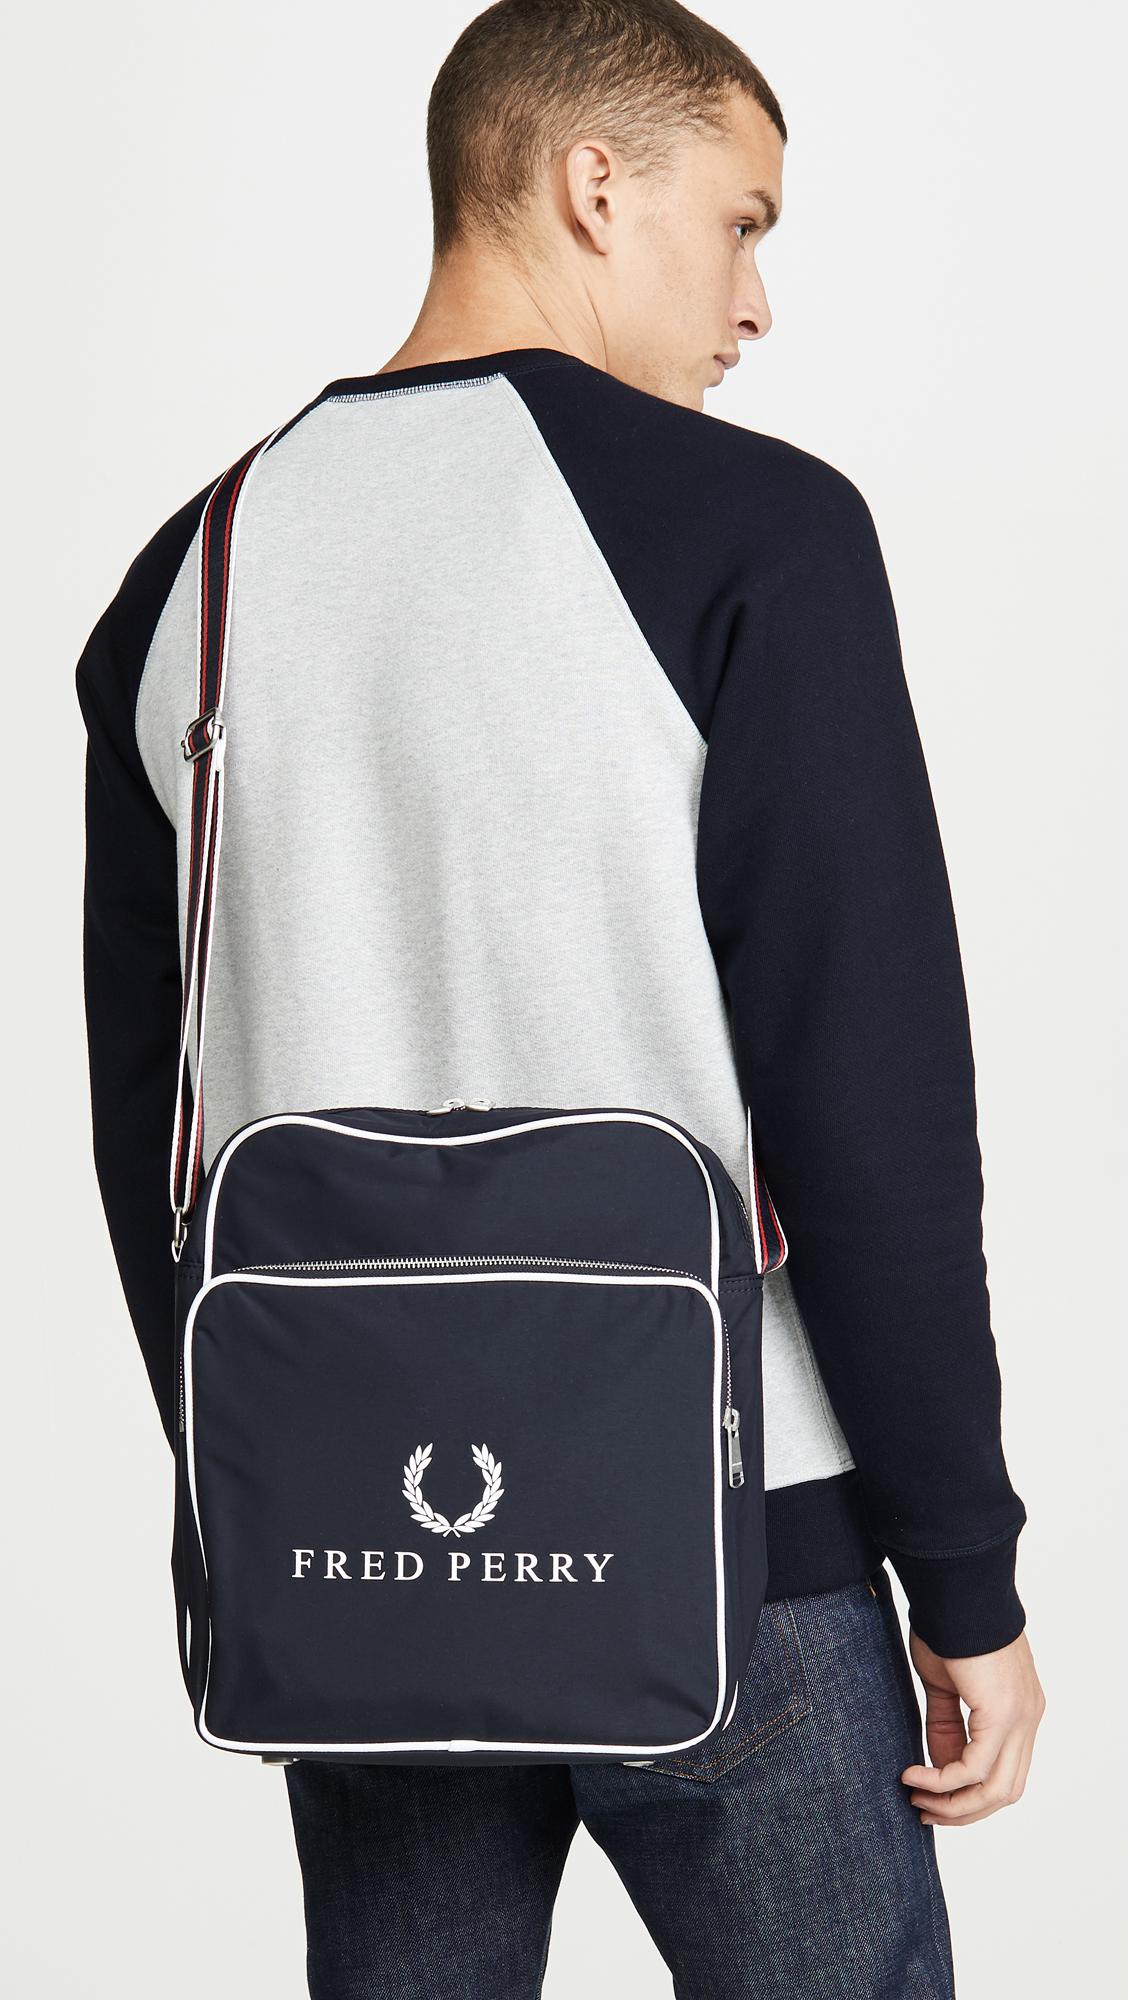 Fred Perry Retro Branded Flight Bag in Navy (Blue) for Men - Lyst